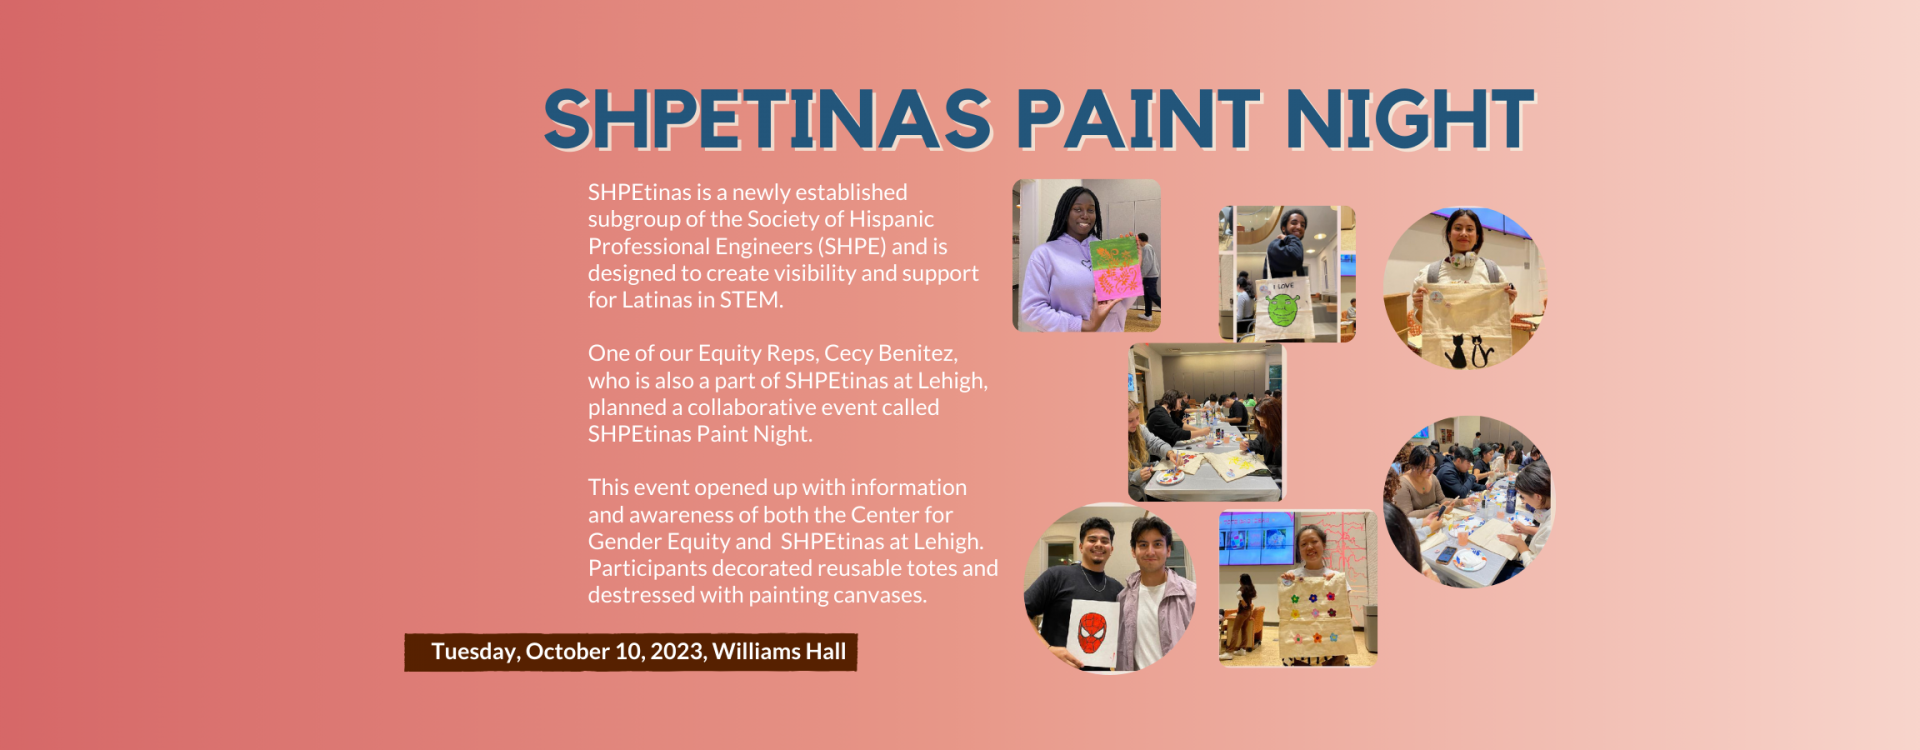 SHPEtinas is a newly established subgroup of the Society of Hispanic Professional Engineers (SHPE) and is designed to create visibility and support for Latinas in STEM.  One of our Equity Reps, Cecy Benitez, who is also a part of SHPEtinas at Lehigh, planned a collaborative event called SHPEtinas Paint Night.  This event opened up with information and awareness of both the Center for Gender Equity and  SHPEtinas at Lehigh. Participants decorated reusable totes and destressed with painting canvases.